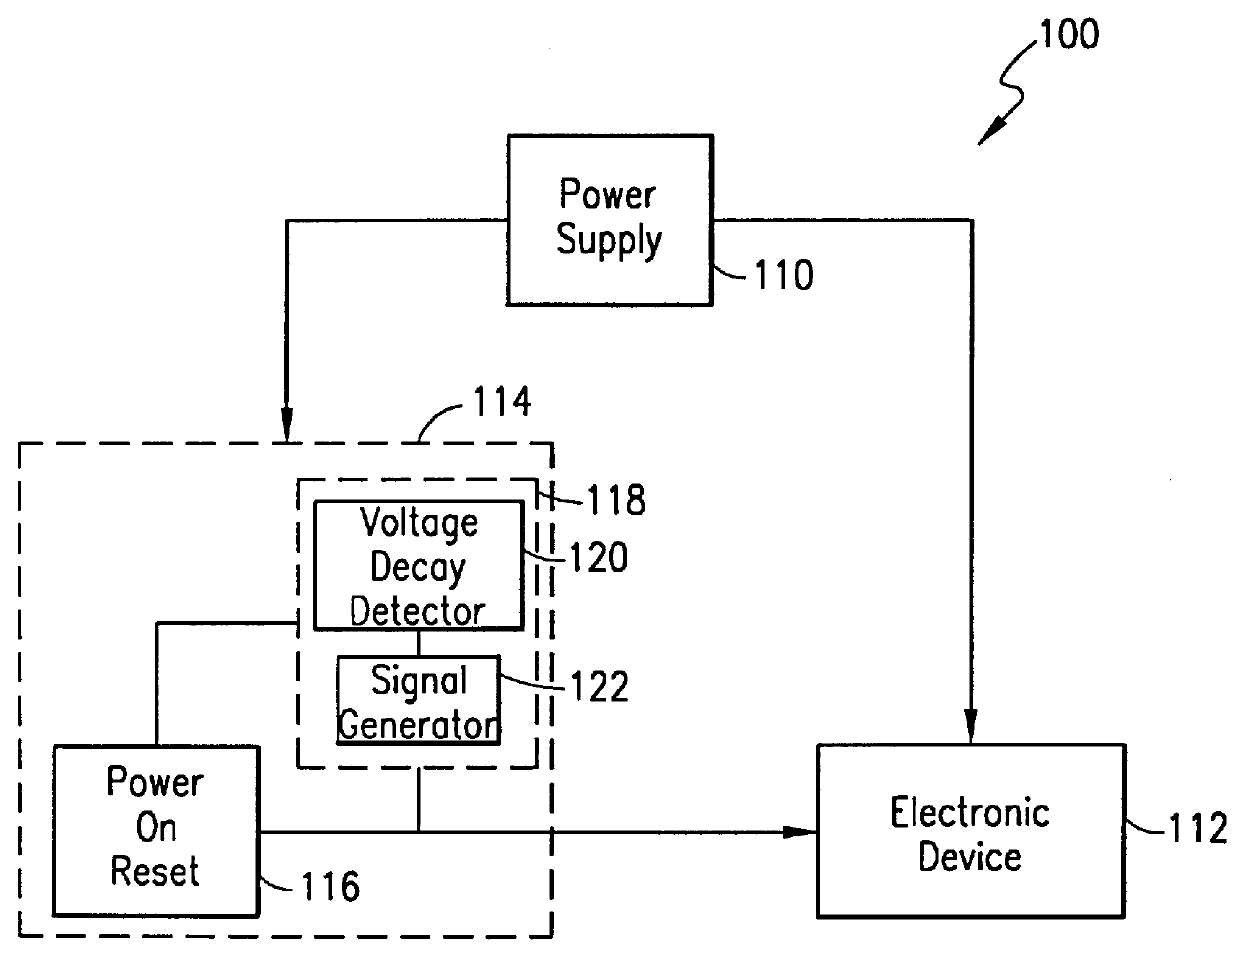 Method for initializing an electronic device using a dual-state power-on-reset circuit